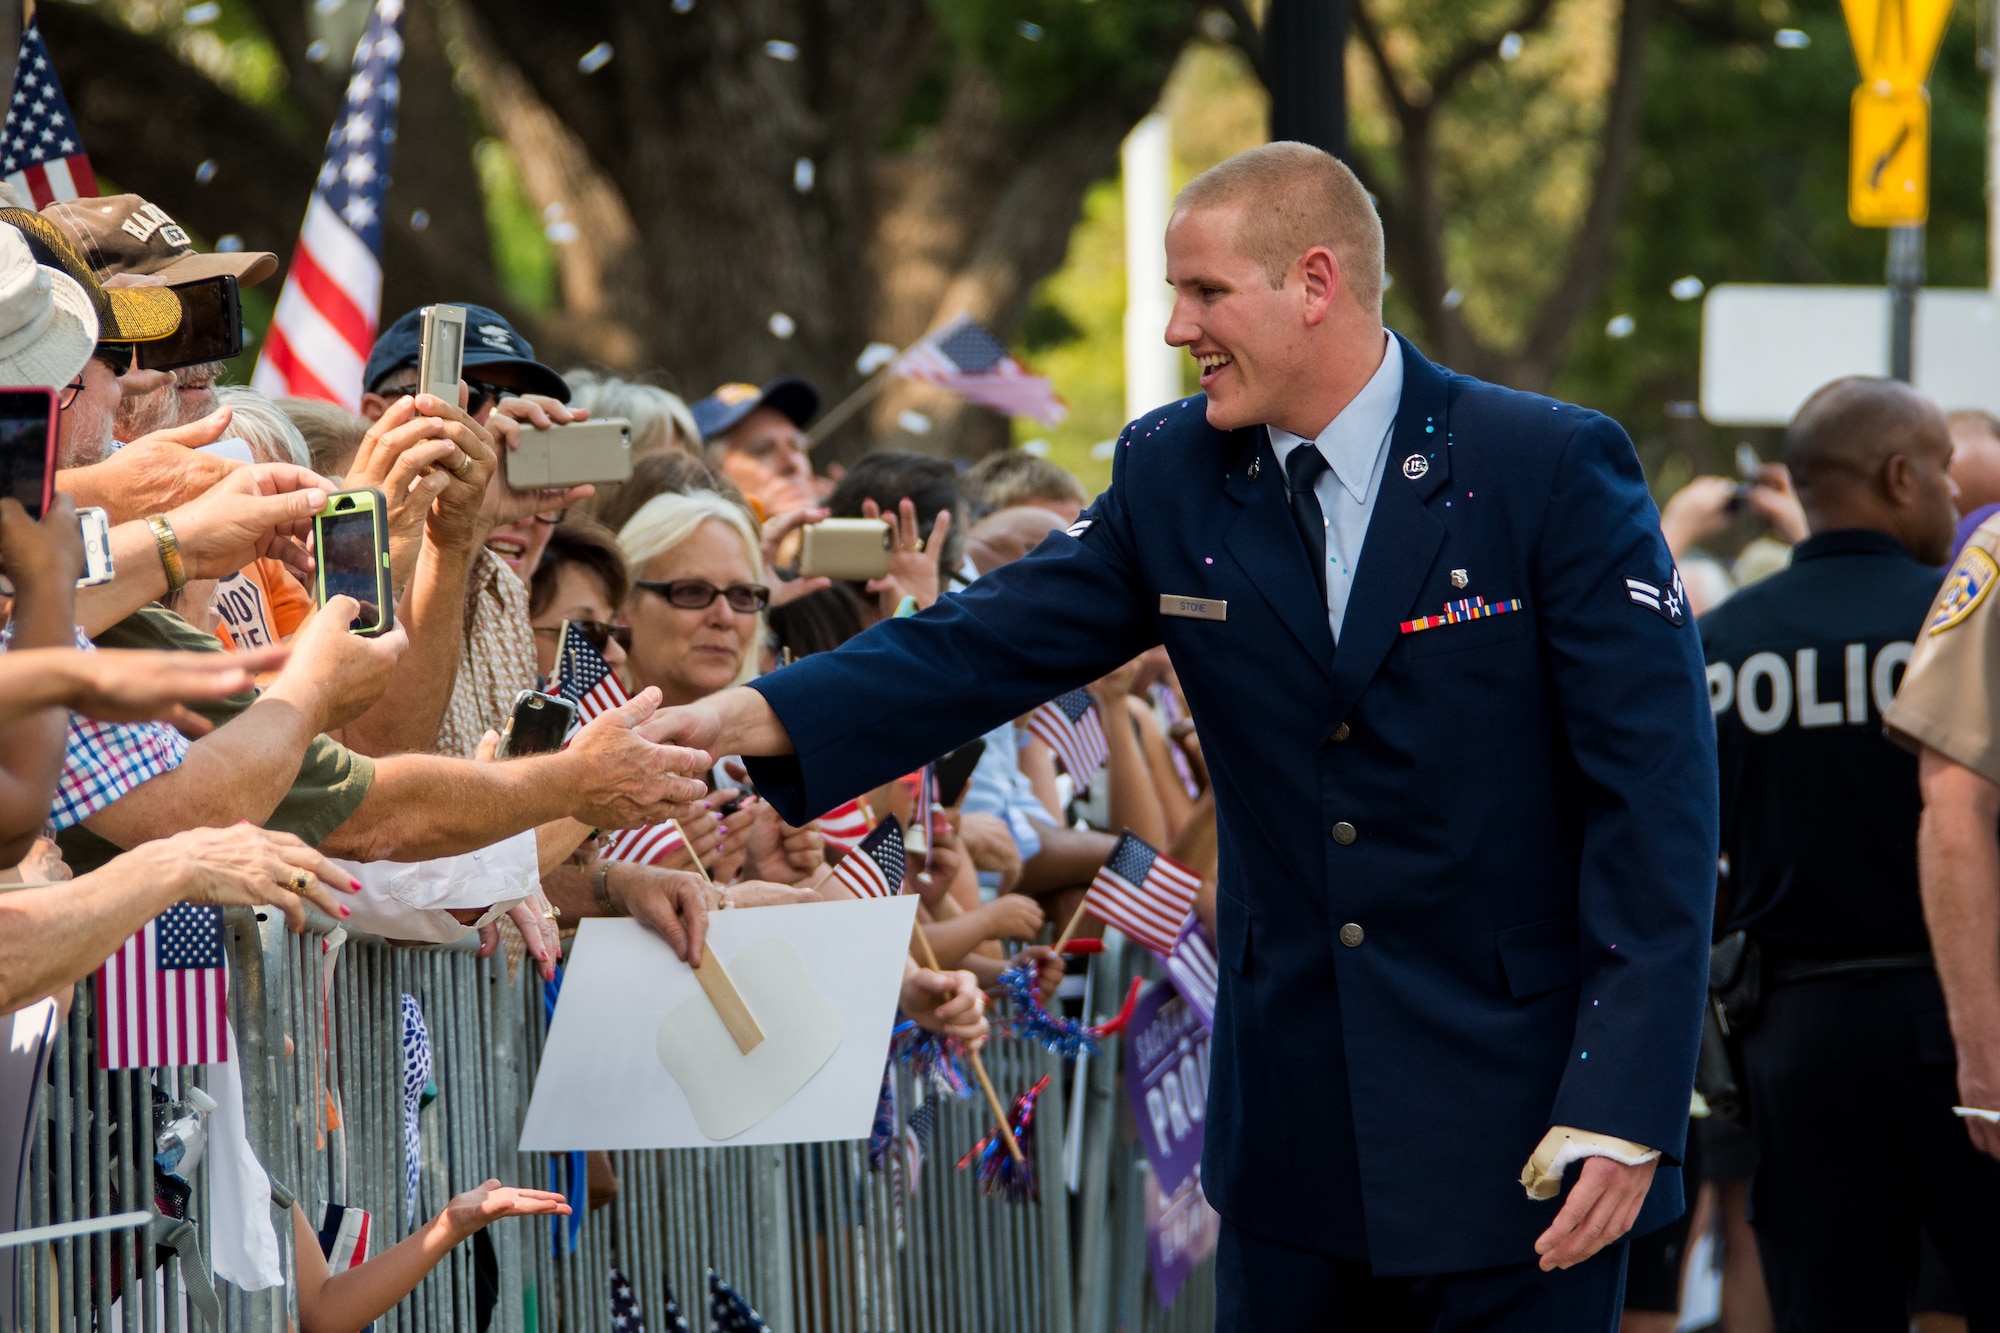 Airman 1st Class Spencer Stone is greeted with a hero's welcome during the Sacramento Hometown Heroes Parade and festivities at the state capitol building in downtown Sacramento, California, Sept. 11, 2015. Hundreds of people lined the streets of downtown Sacramento to welcome home and honor Stone, Anthony Sadler and Alek Skarlatos. The trio of friends are responsible for thwarting a terrorist attack aboard a train headed toward Paris Aug. 21. (U.S. Air Force photo/Senior Airman Charles Rivezzo)